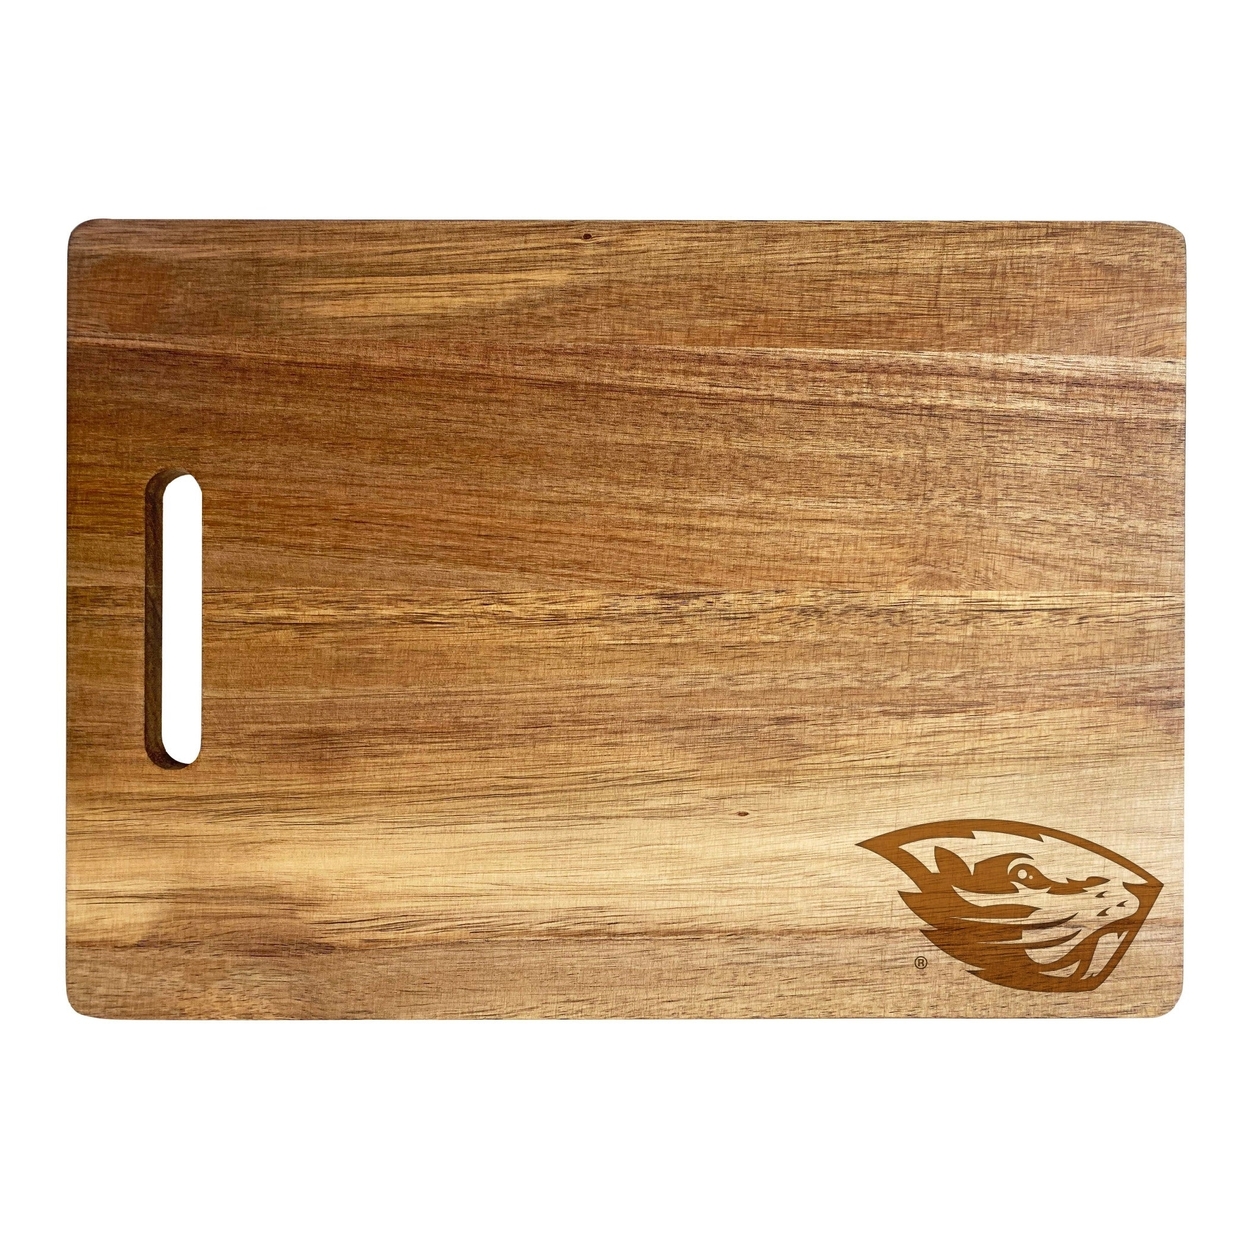 Oregon State Beavers Engraved Wooden Cutting Board 10 X 14 Acacia Wood - Small Engraving